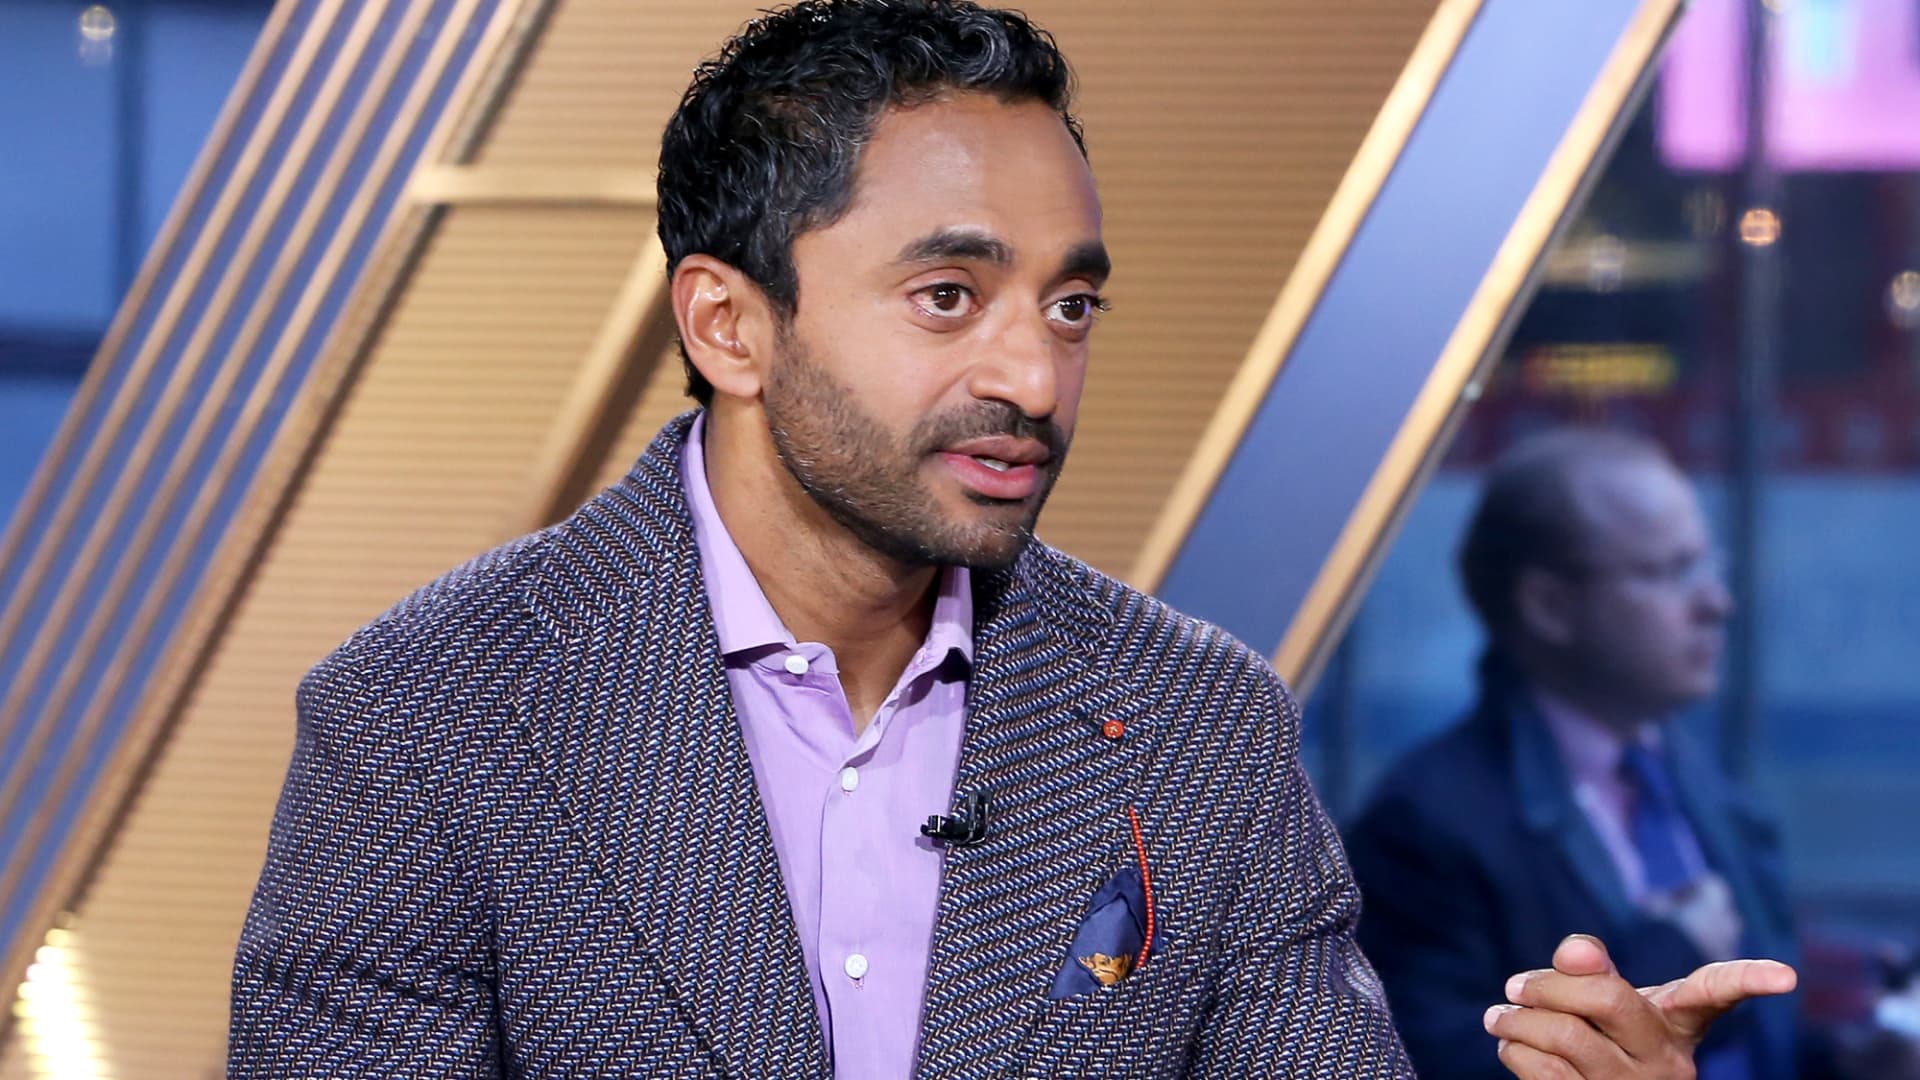 Chamath Palihapitiya blames the Fed for 'perverted' market conditions that benefited him